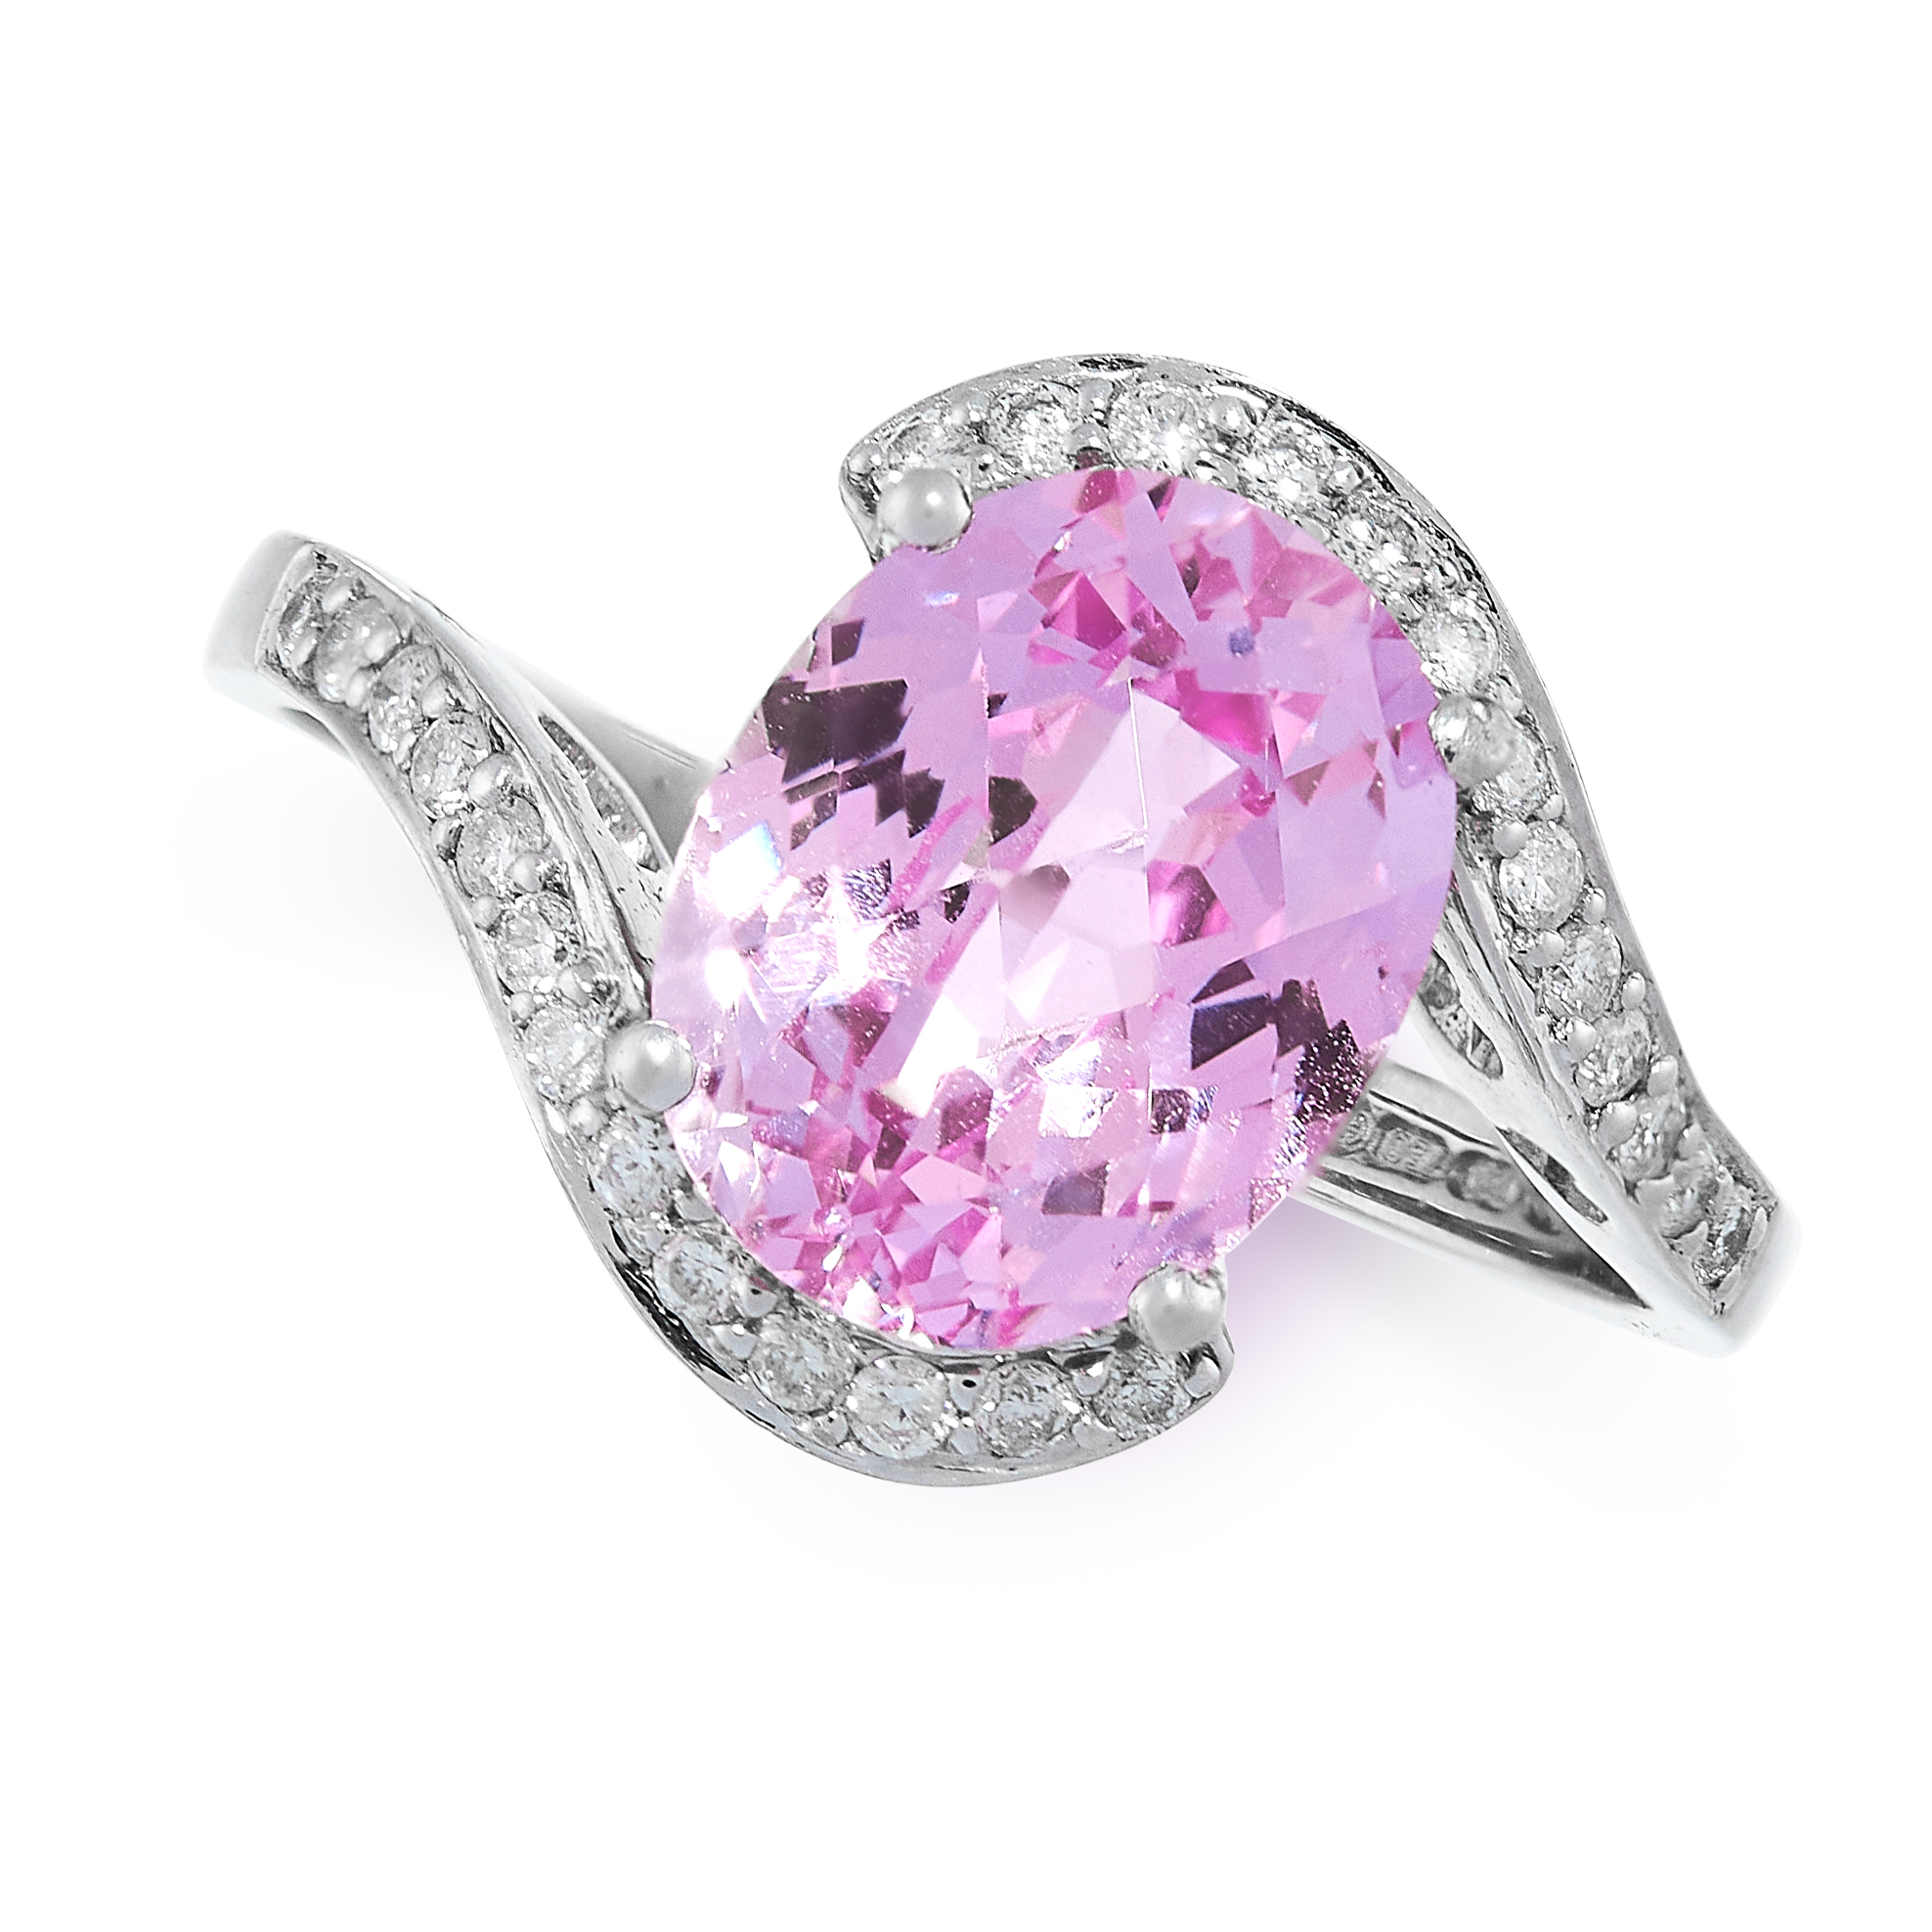 PINK TOPAZ AND DIAMOND RING comprising of a oval faceted pink topaz in a twisted border of round cut